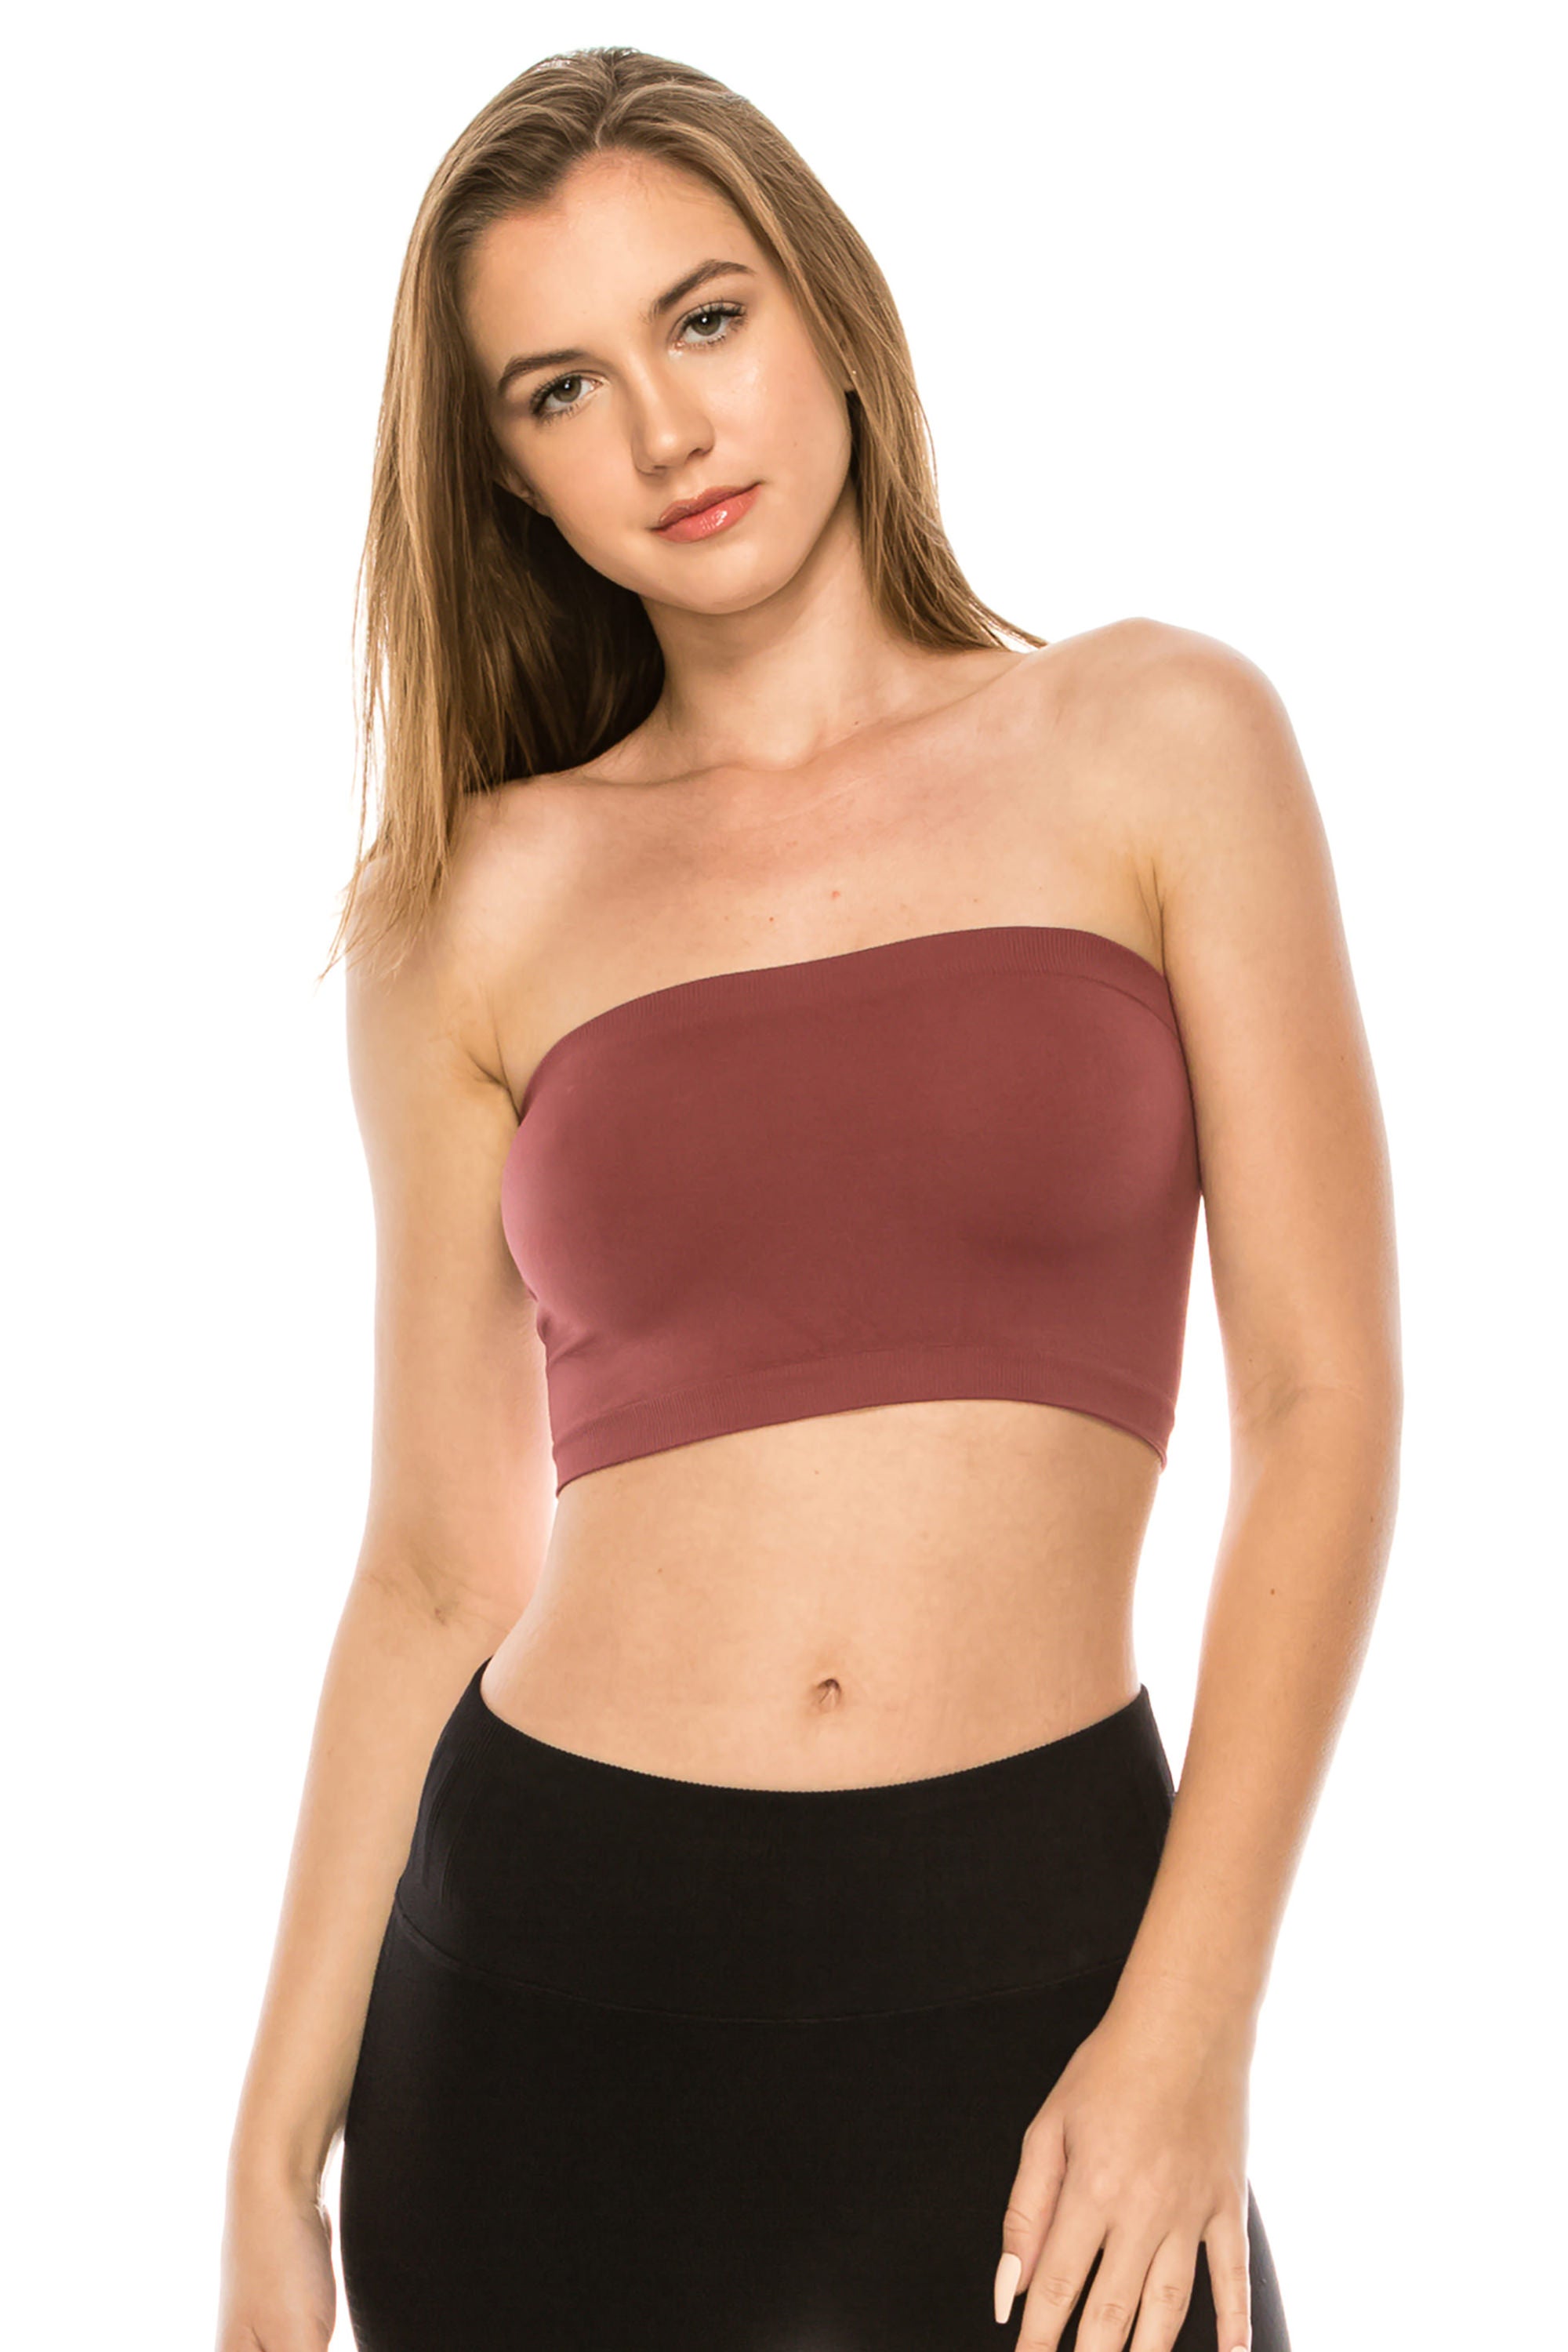 Strapless Bandeau Tube Top - Fits Small to XL - Seamless